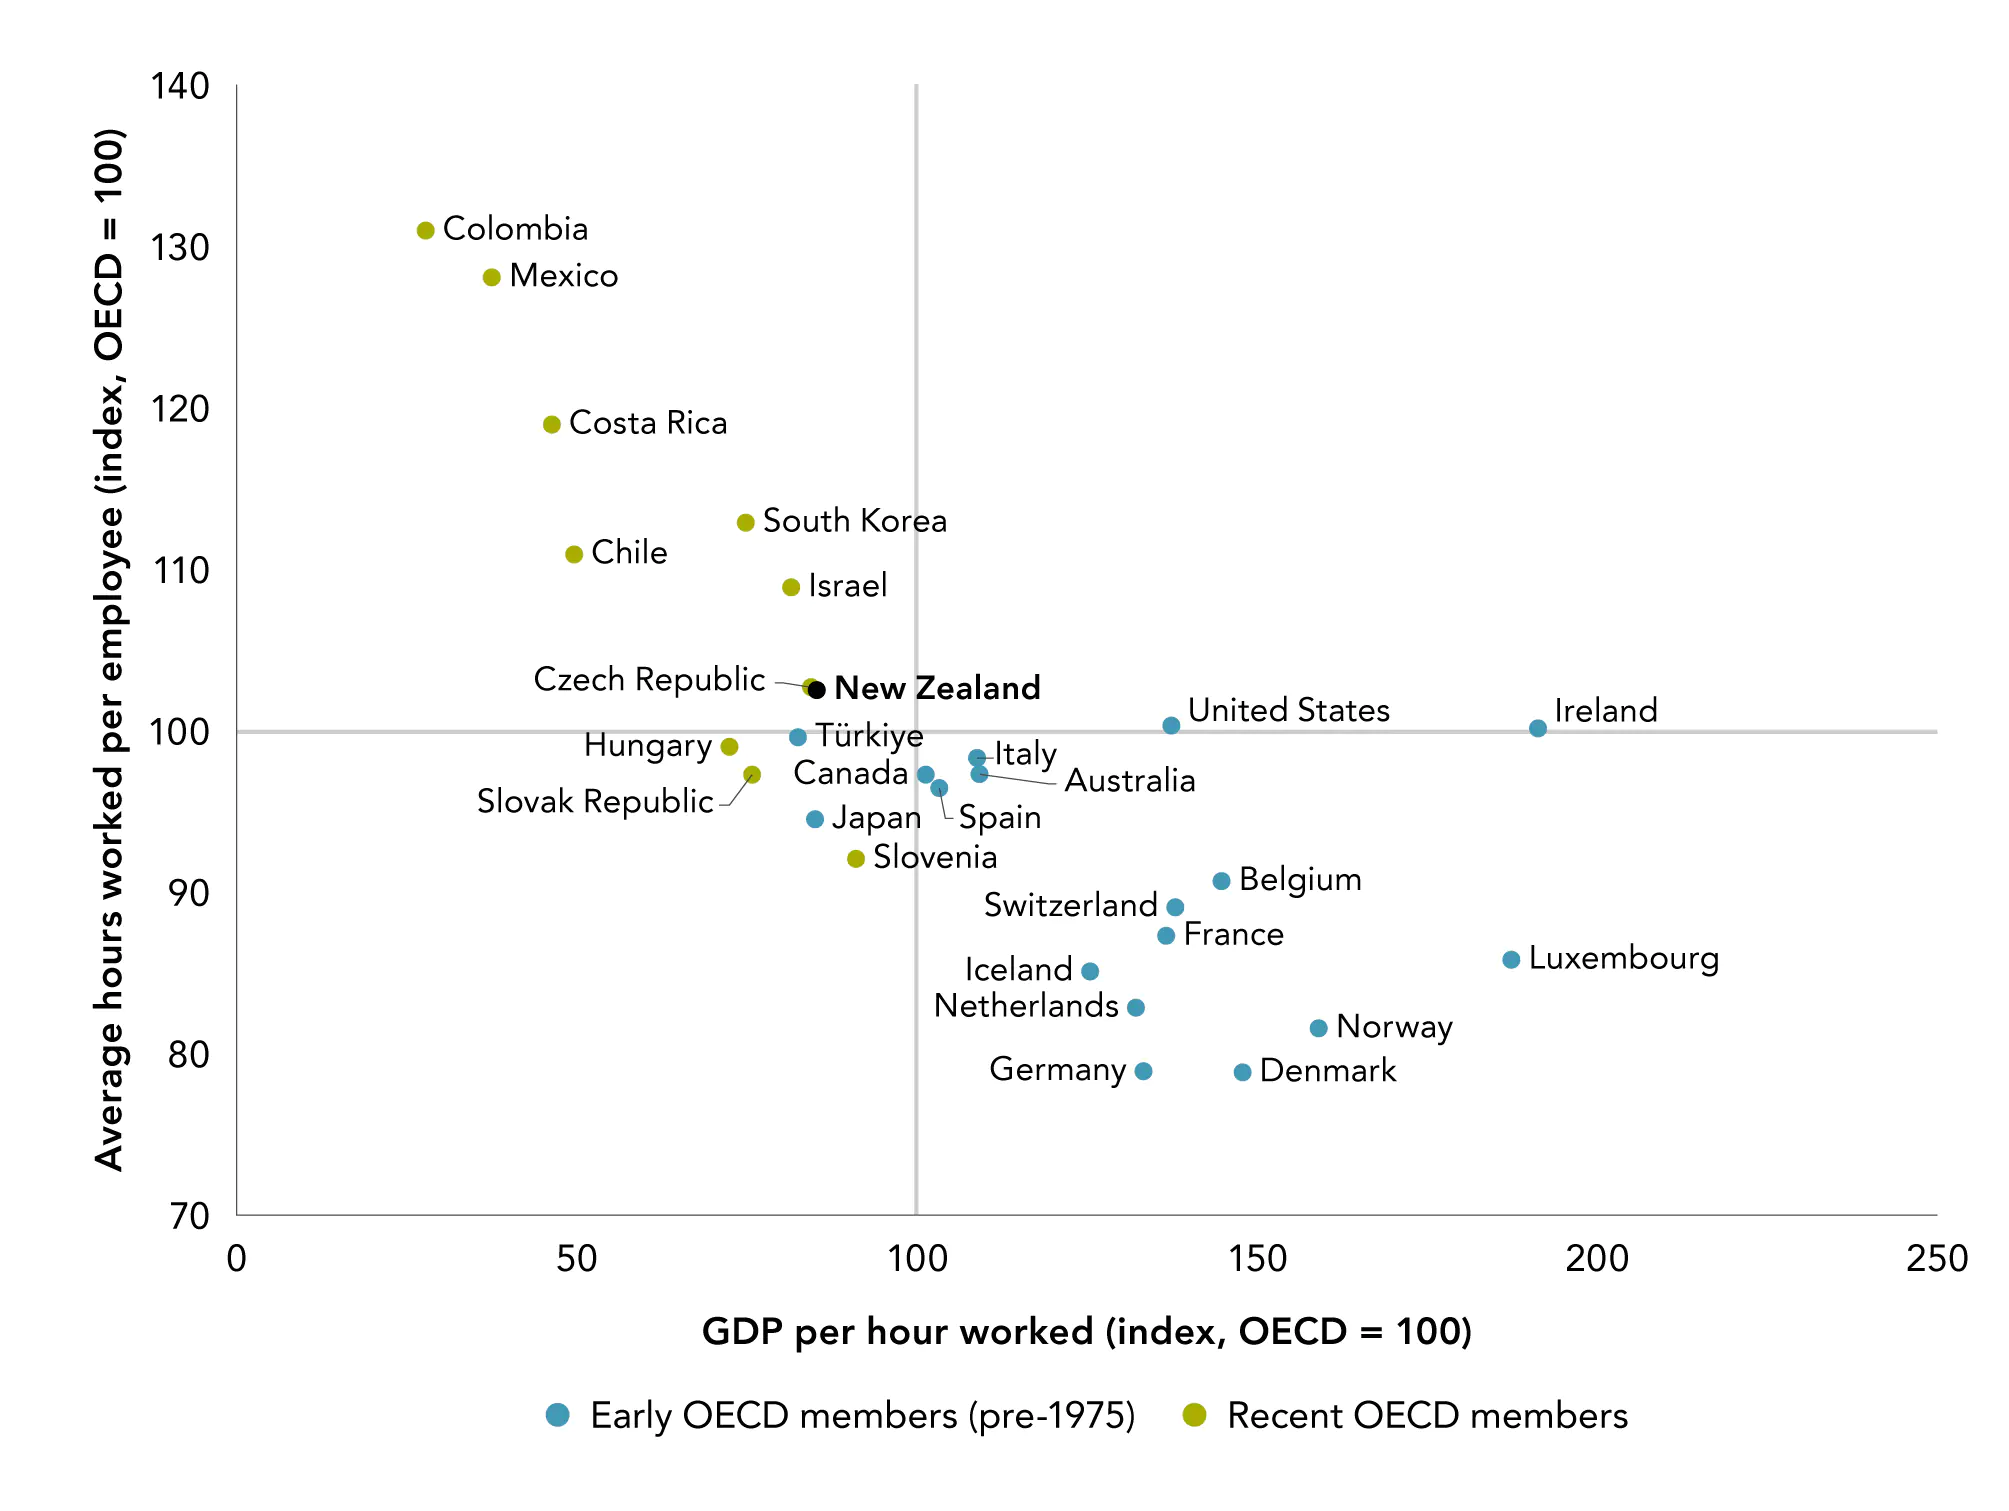 Figure 2.7 New Zealanders work longer hours and get less output per hour than most OECD countries